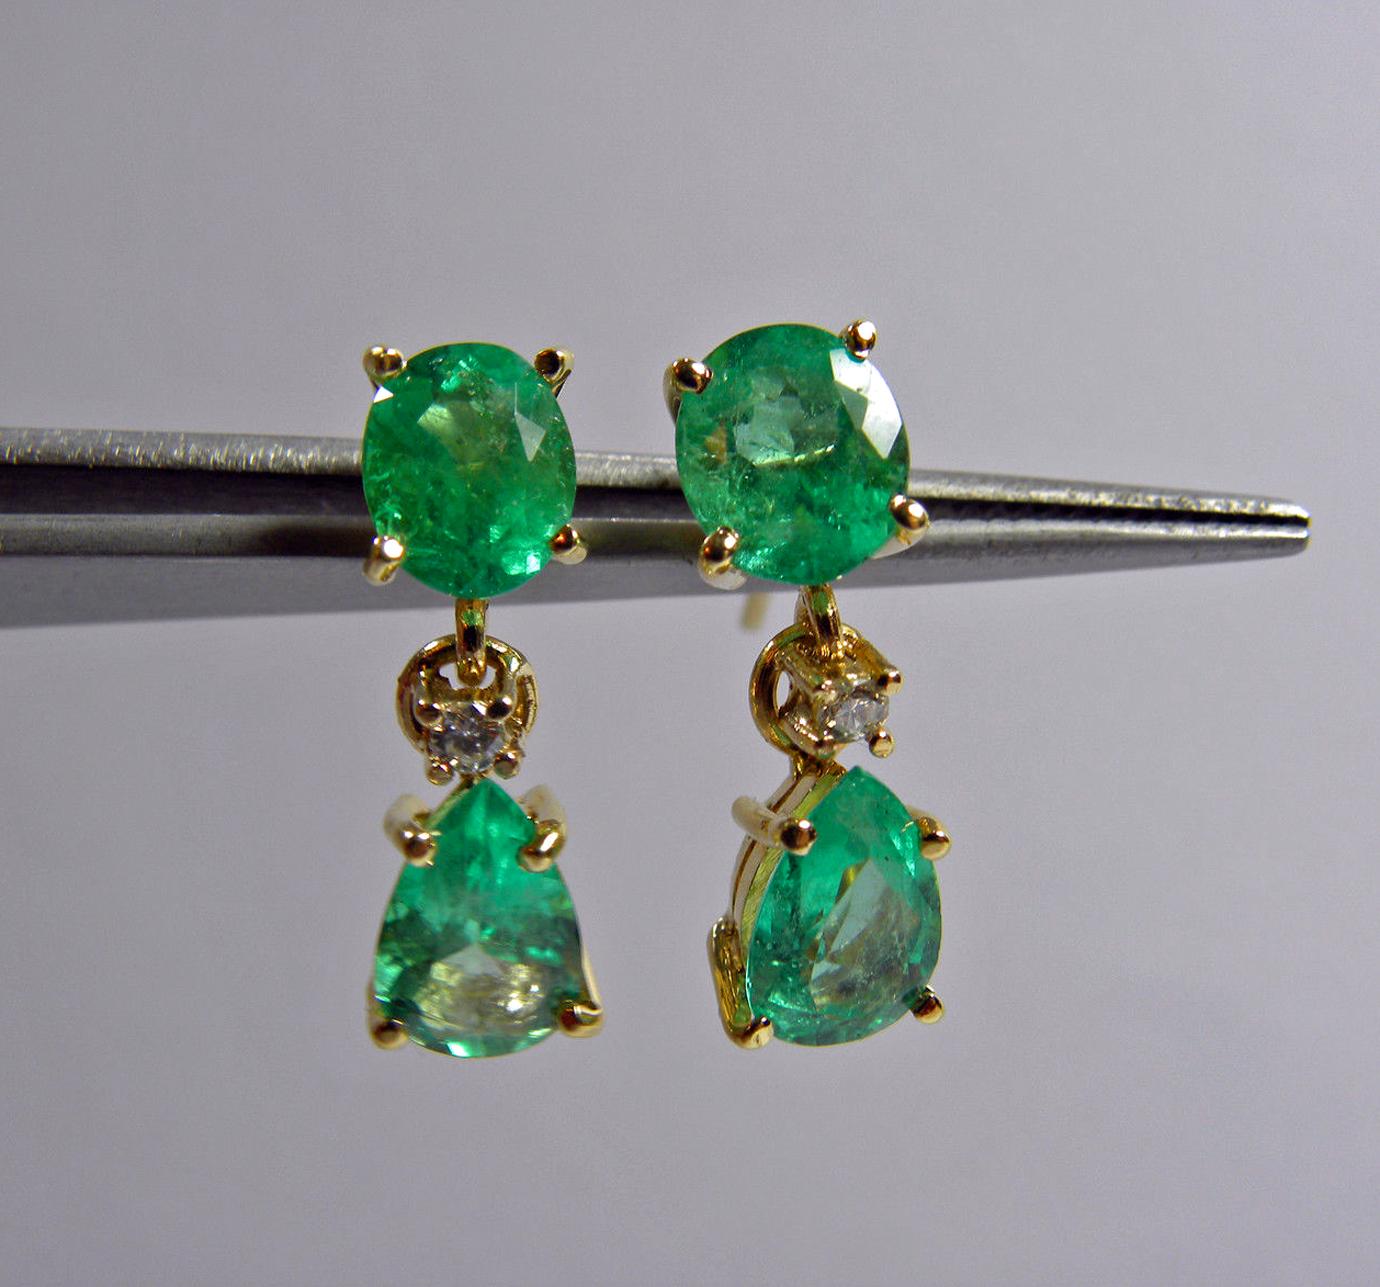 3.56 CARAT 100% NATURAL COLOMBIAN EMERALD and DIAMOND DROP EARRINGS 18K YELLOW GOLD
Earrings Measurement:  19.00mm x 6.20mm
Primary Stones: 100% Natural Colombian Emeralds
Shape or Cut : Oval & Pear Cut 3.50cts
Average Color/Clarity Emerald: Medium